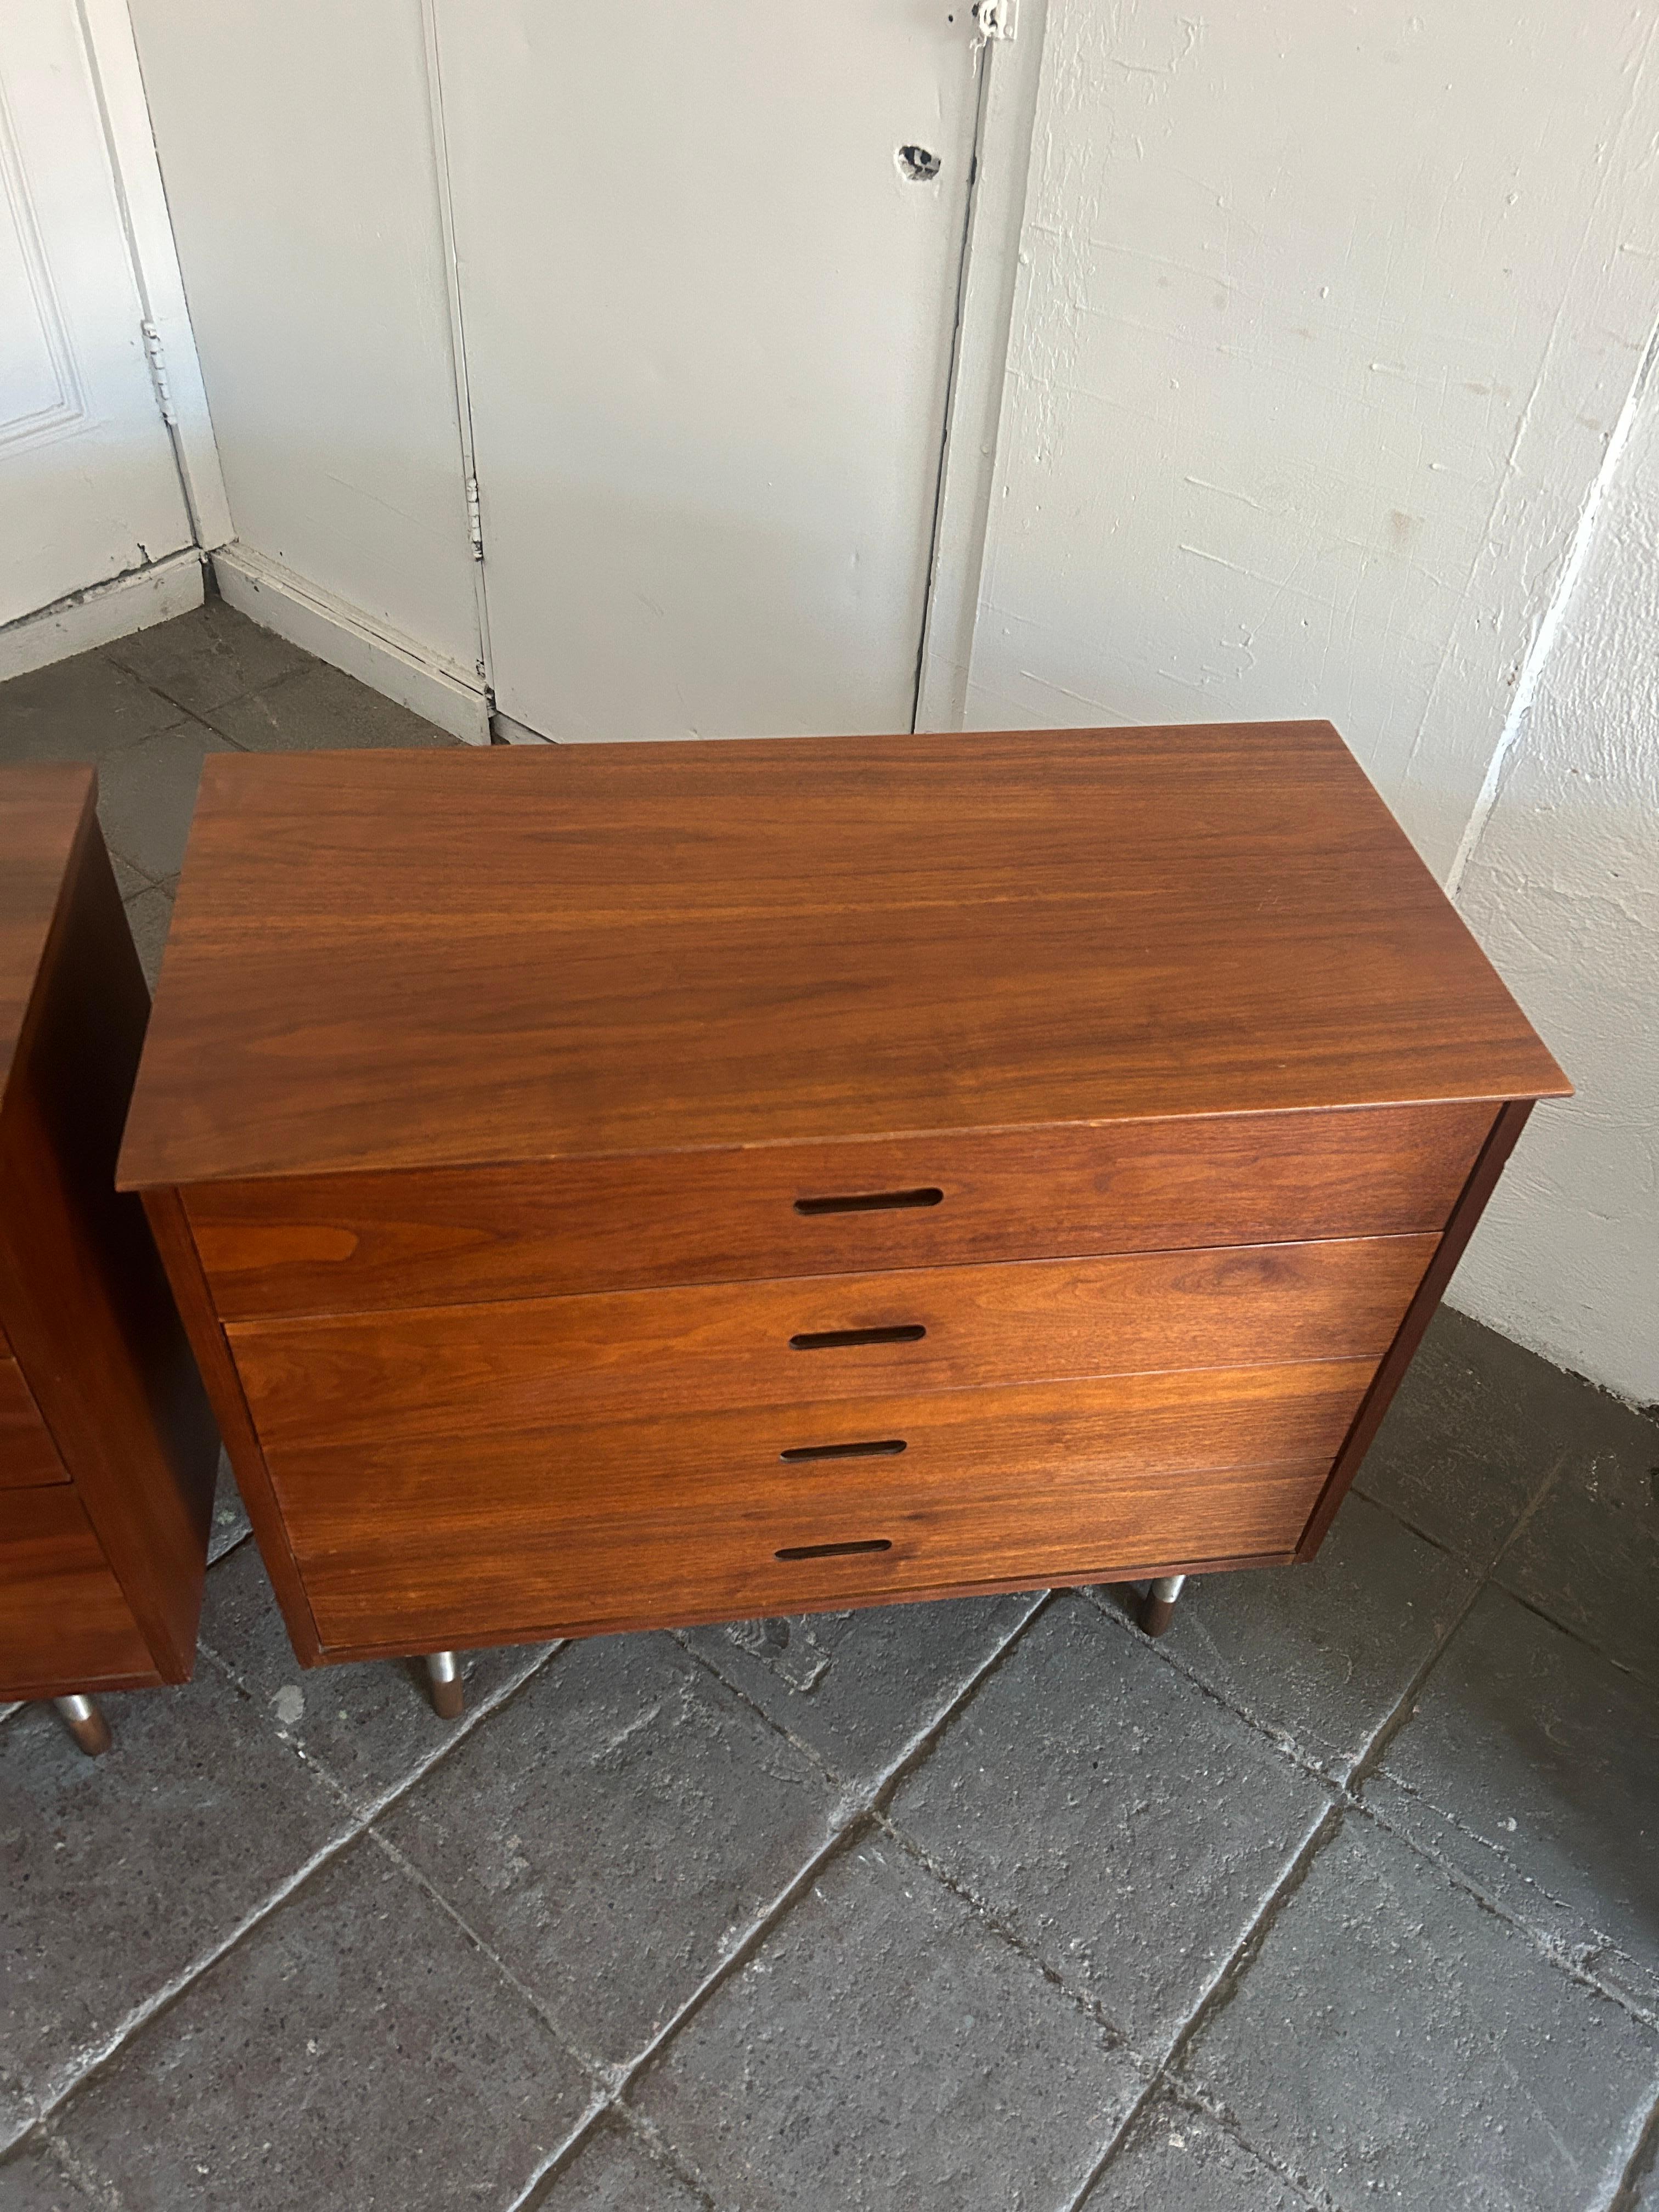 Pair of mid century 4 drawer walnut dressers by founders. Great pair of walnut dressers inset carved handles. Each dresser sits on 4 round steel and walnut dowel legs. Great matching pair. Made in USA by founders. Ready for use. Located in Brooklyn